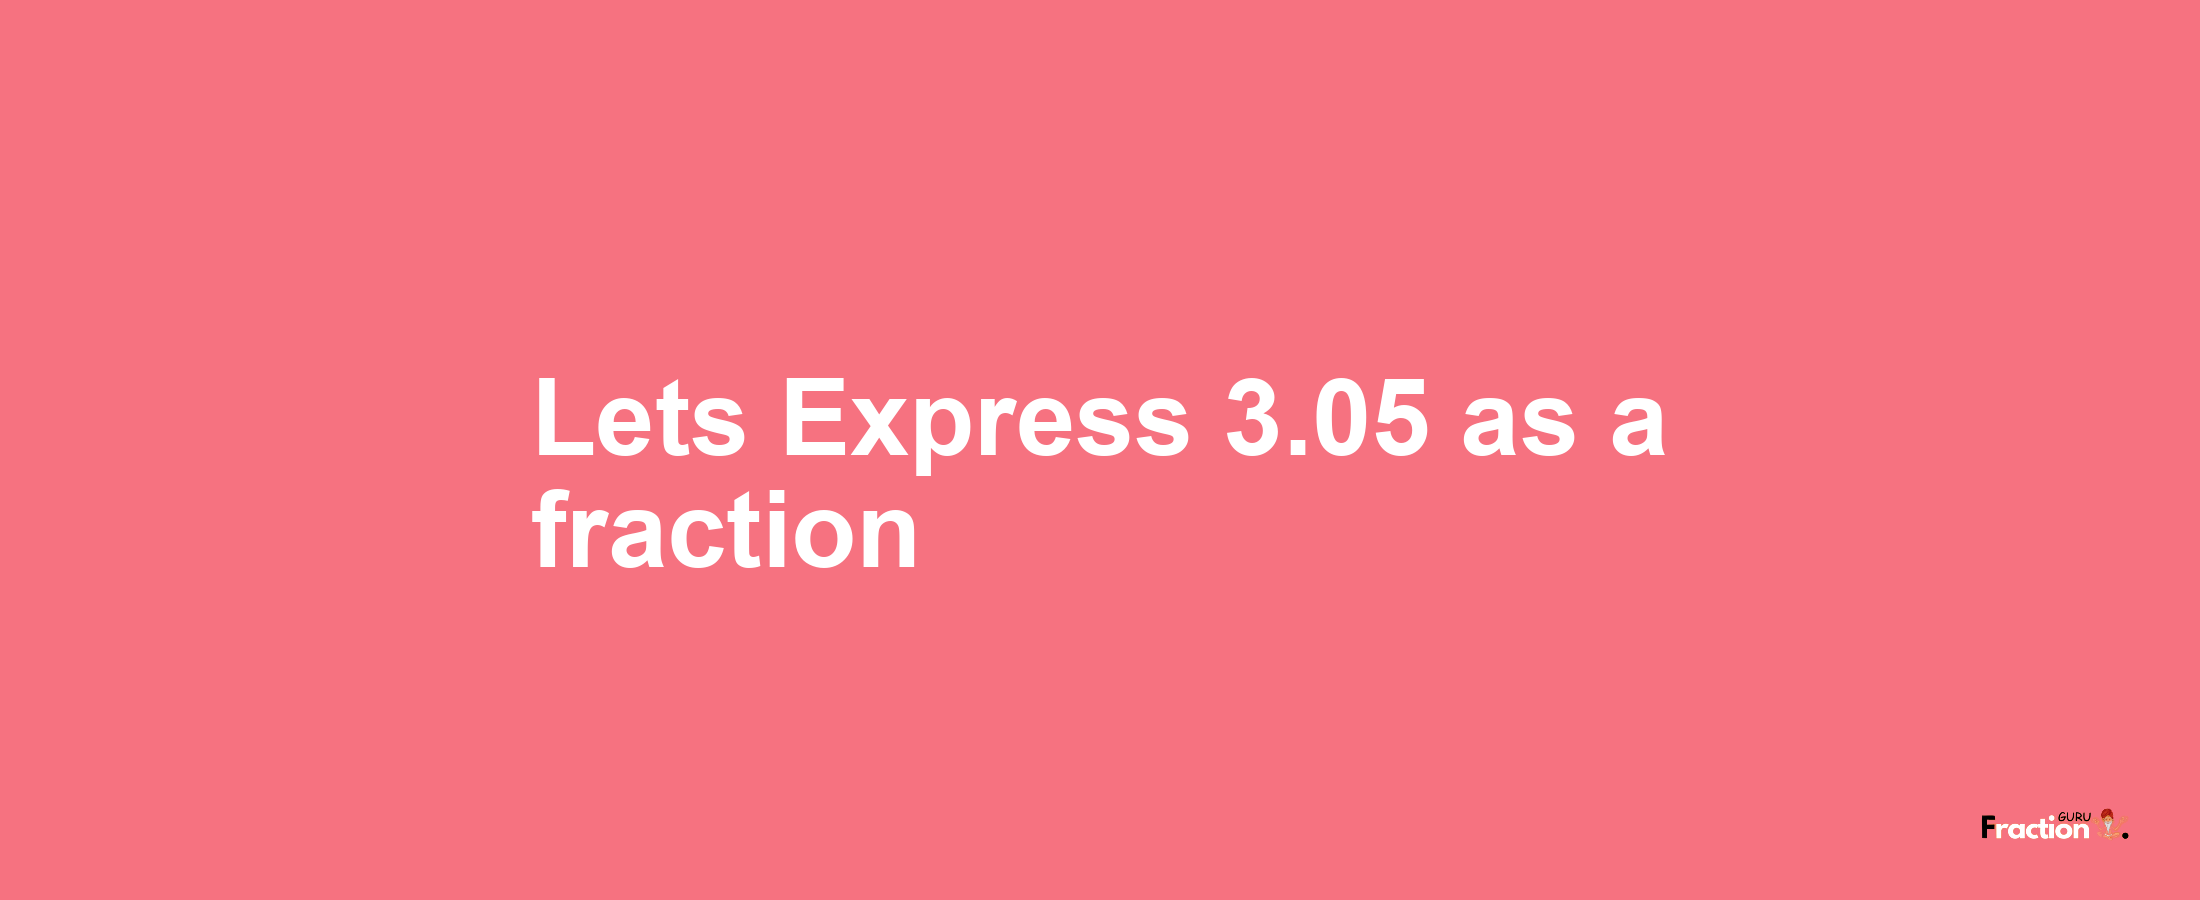 Lets Express 3.05 as afraction